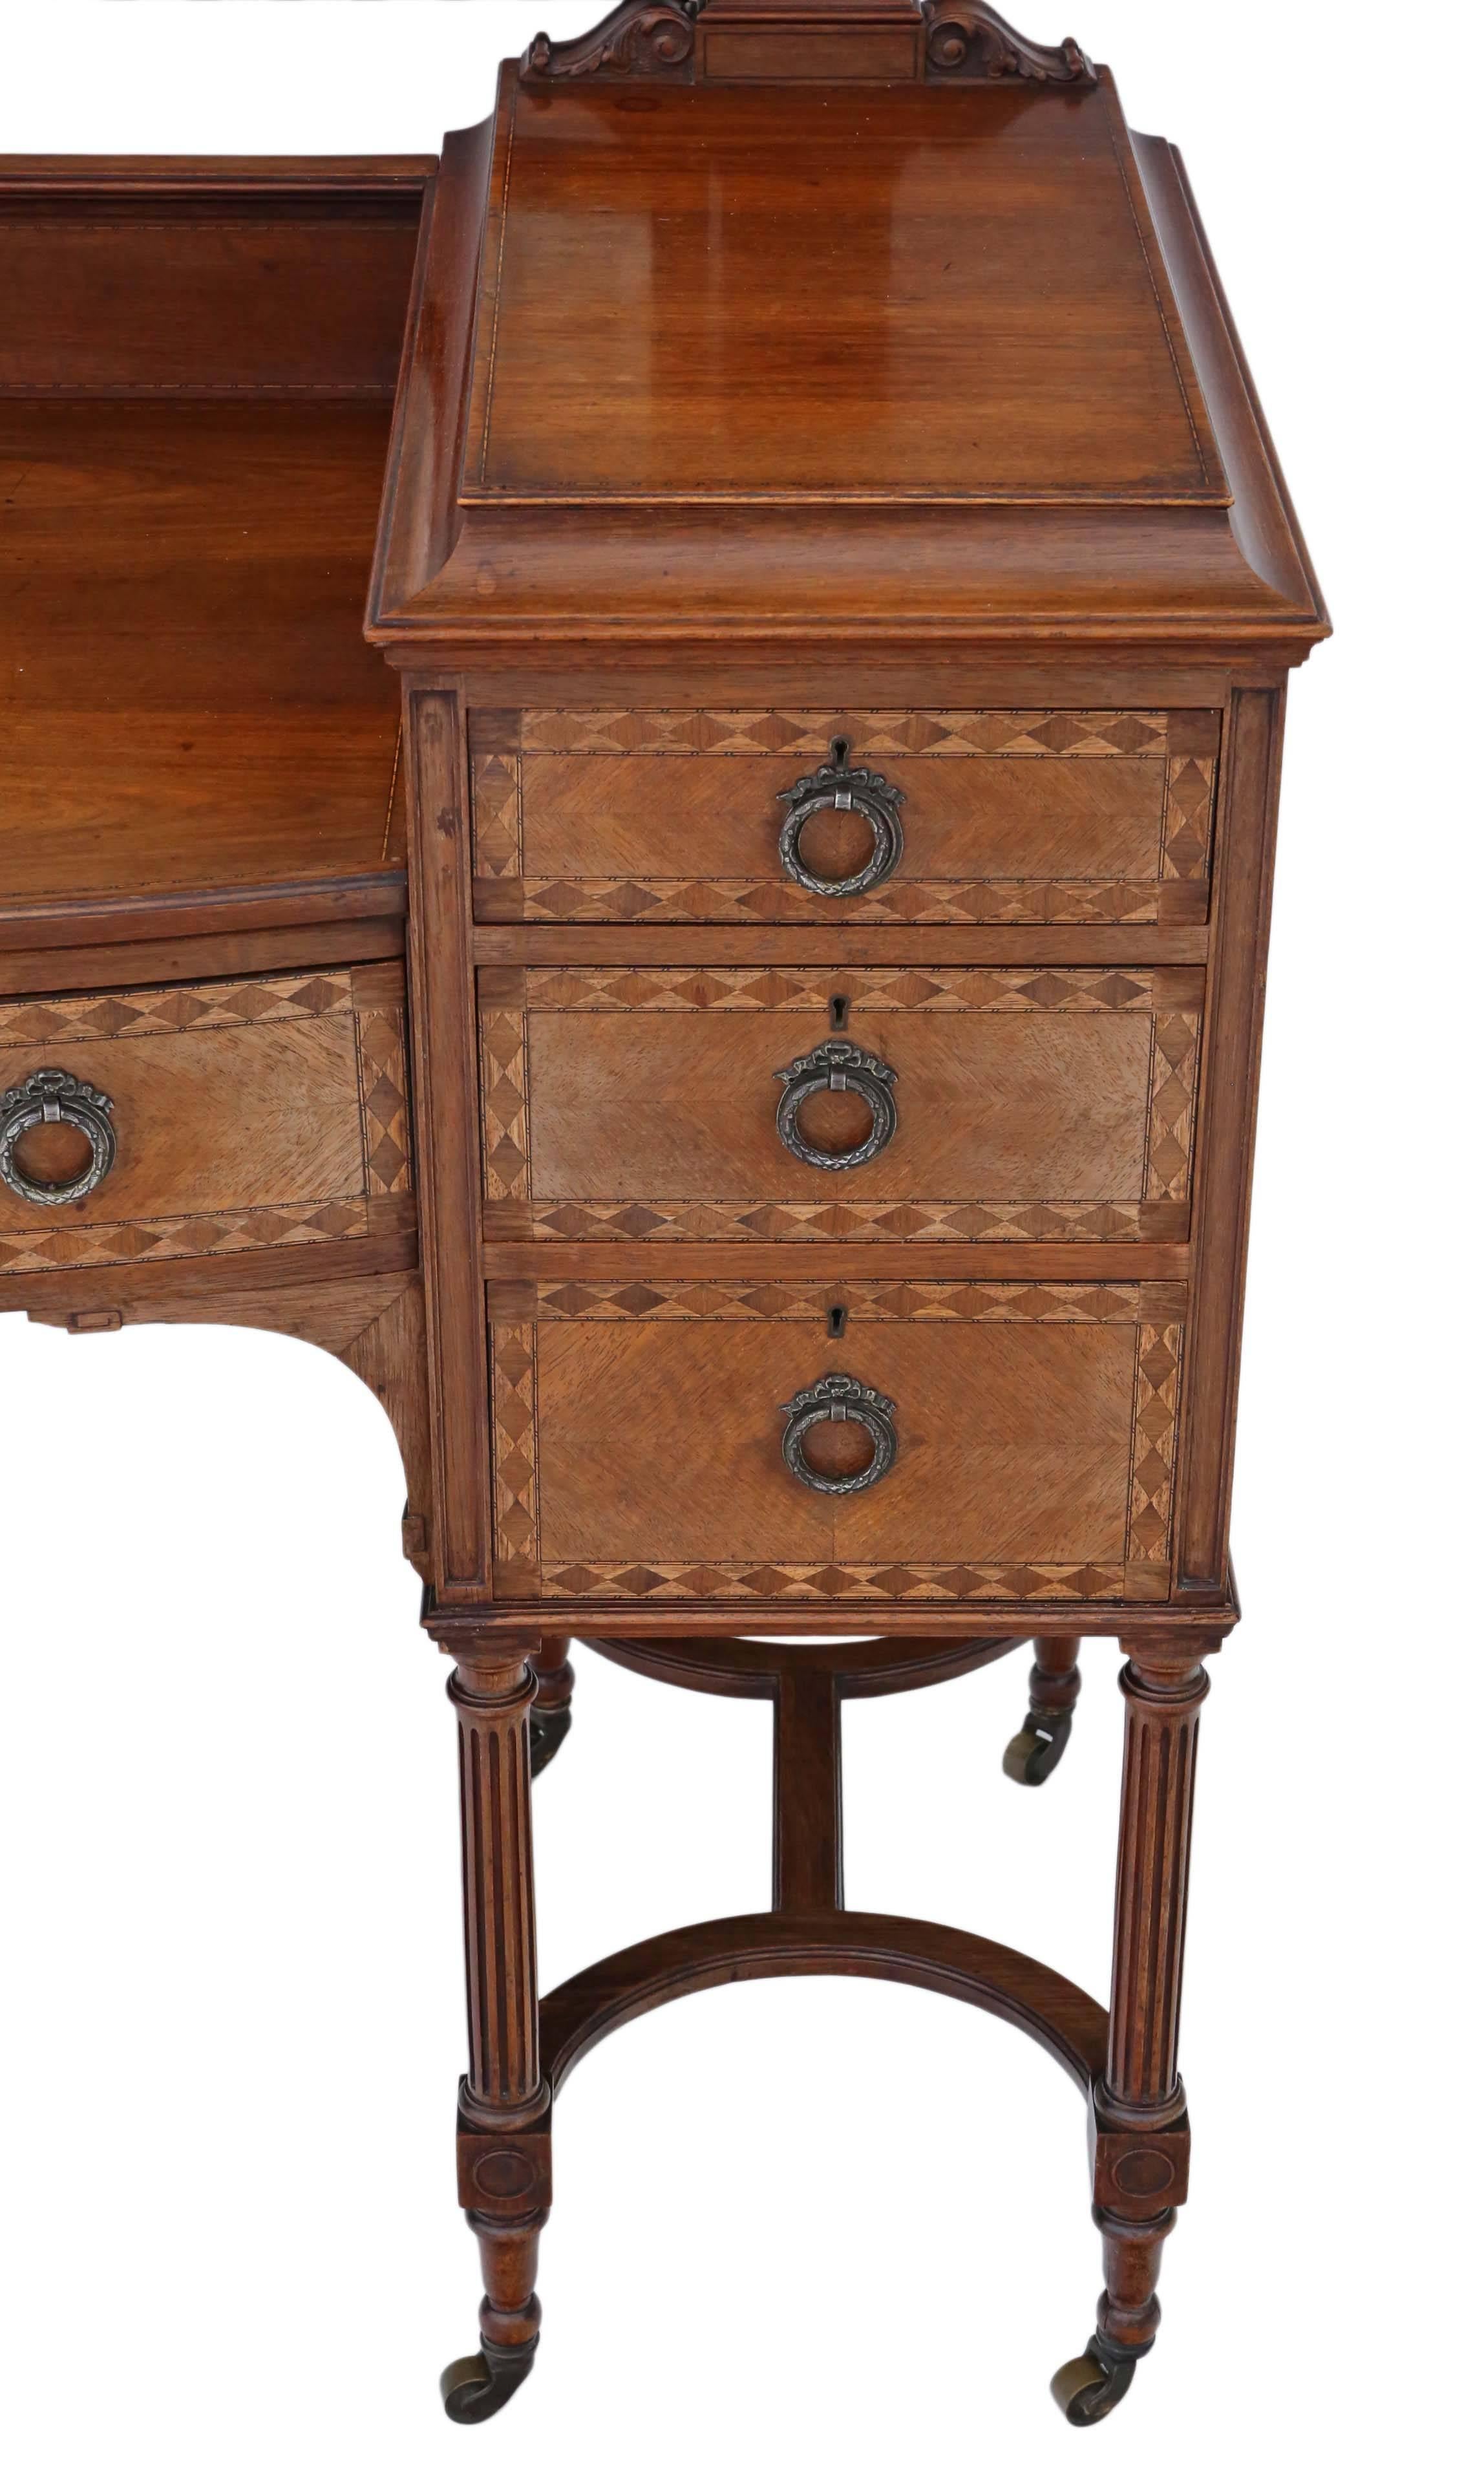 Inlay Antique Quality Edwardian circa 1900-1910 Inlaid Rosewood Dressing Table For Sale